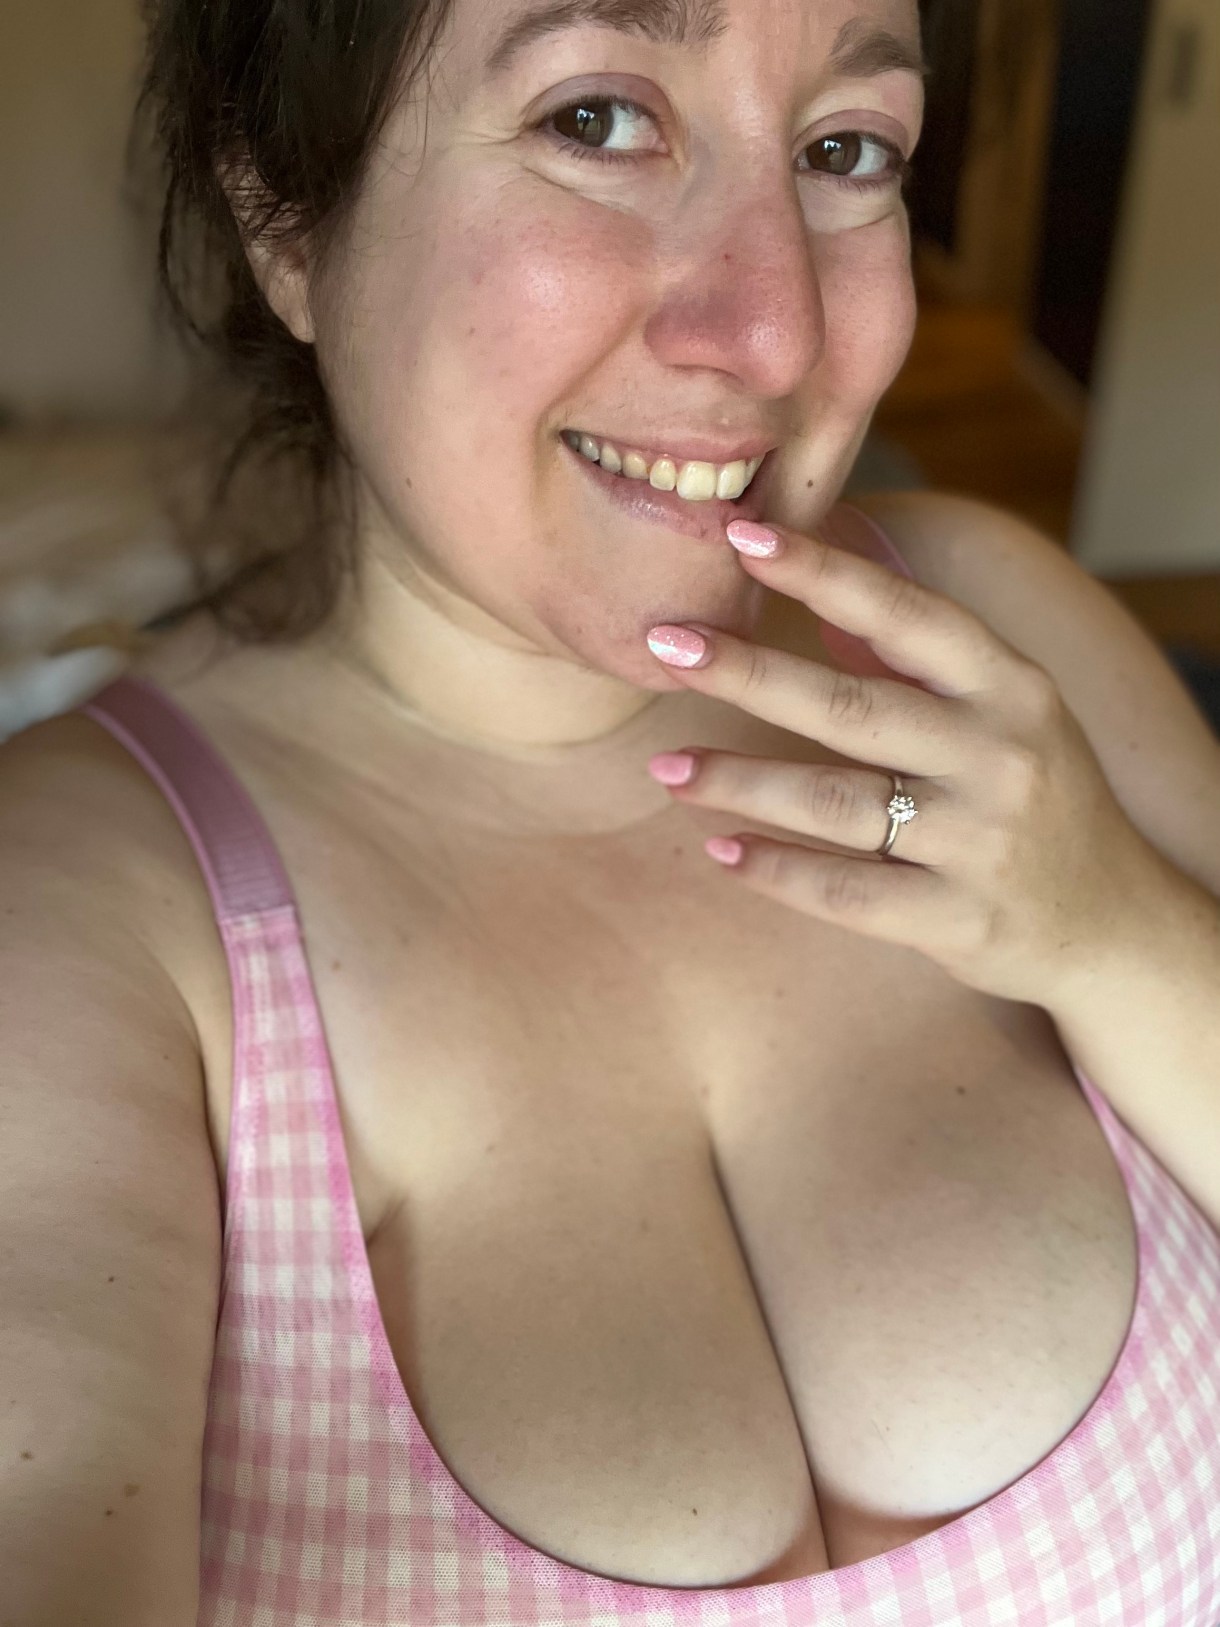 Vanessa is a white woman with brown hair who here is smiling in a pink gingham swimsuit top while showing off pink nails and her engagement ring